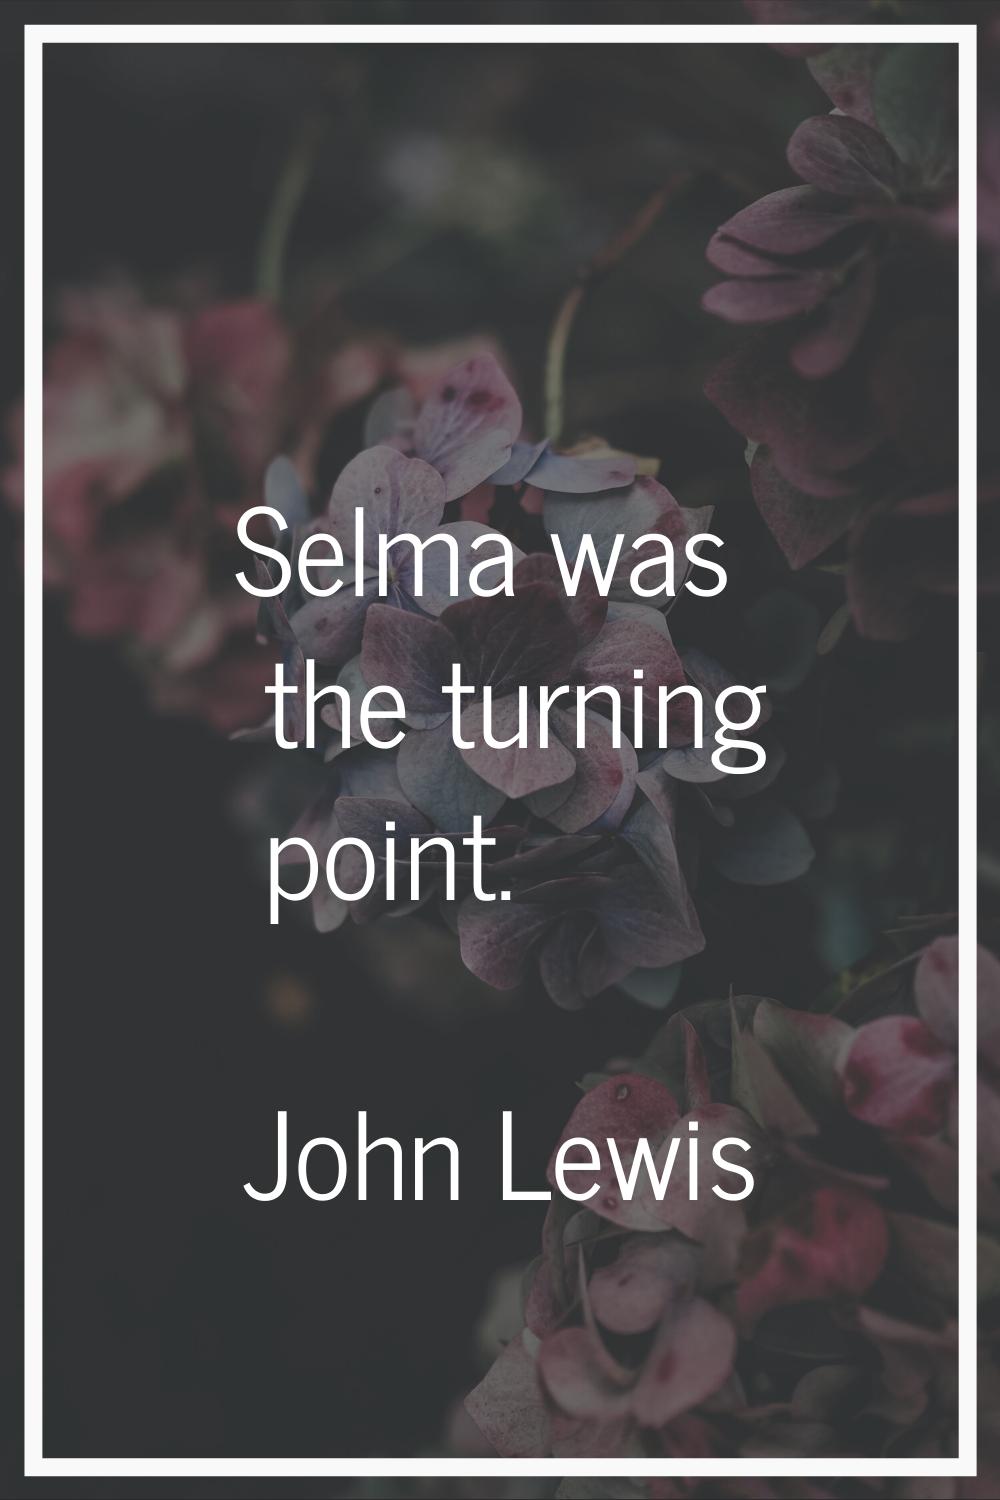 Selma was the turning point.